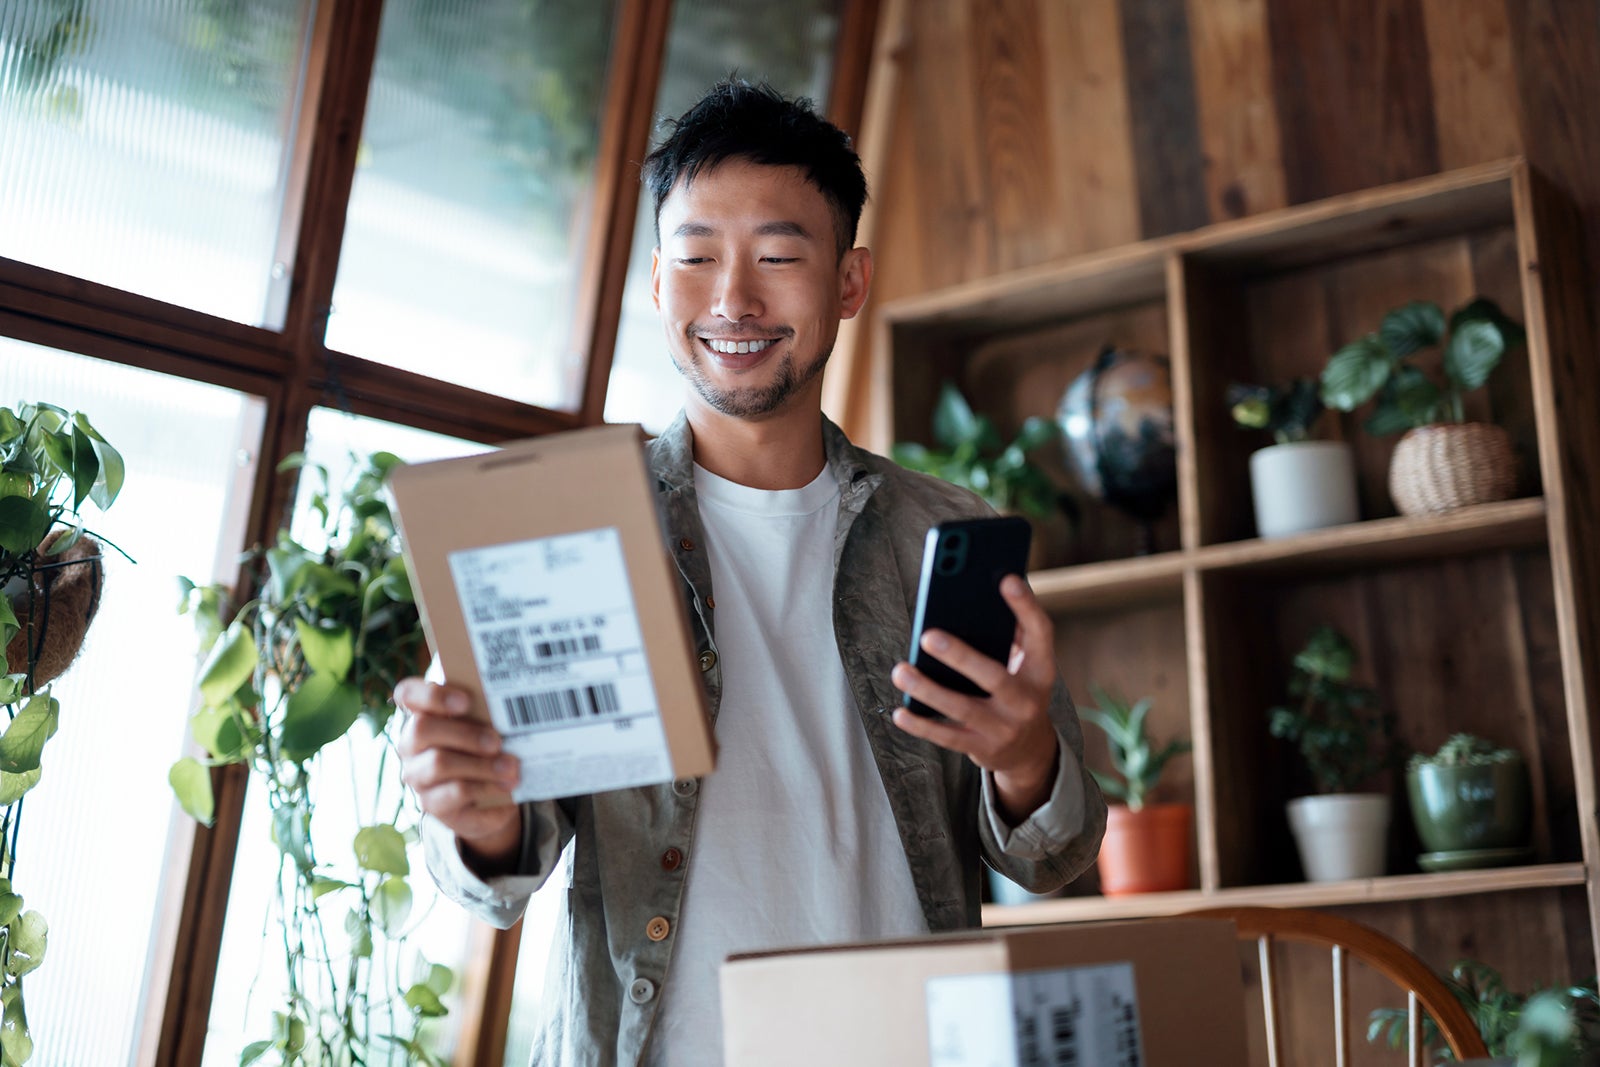 Smiling young Asian man checking electronic banking on his smartphone as he received delivered packages from online purchases at home. Online shopping. Online banking. Shopping and paying safely online